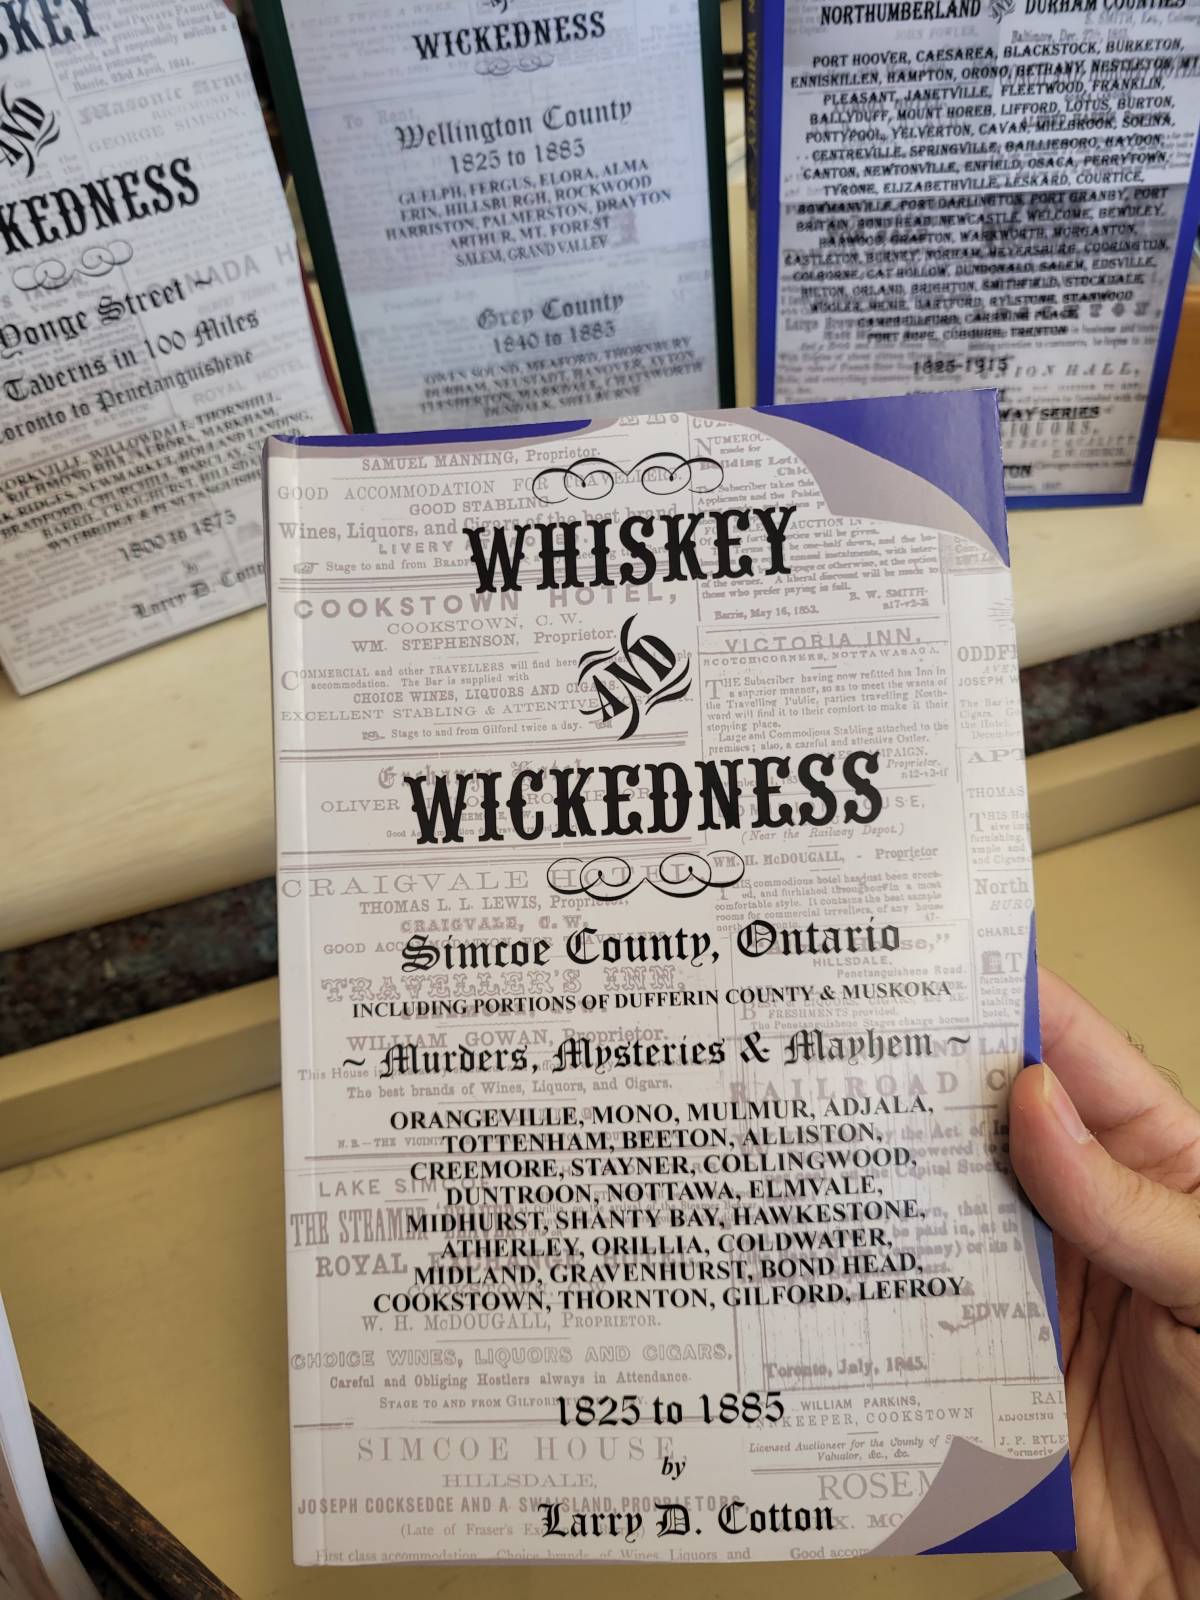 Whiskey and Wickedness books available